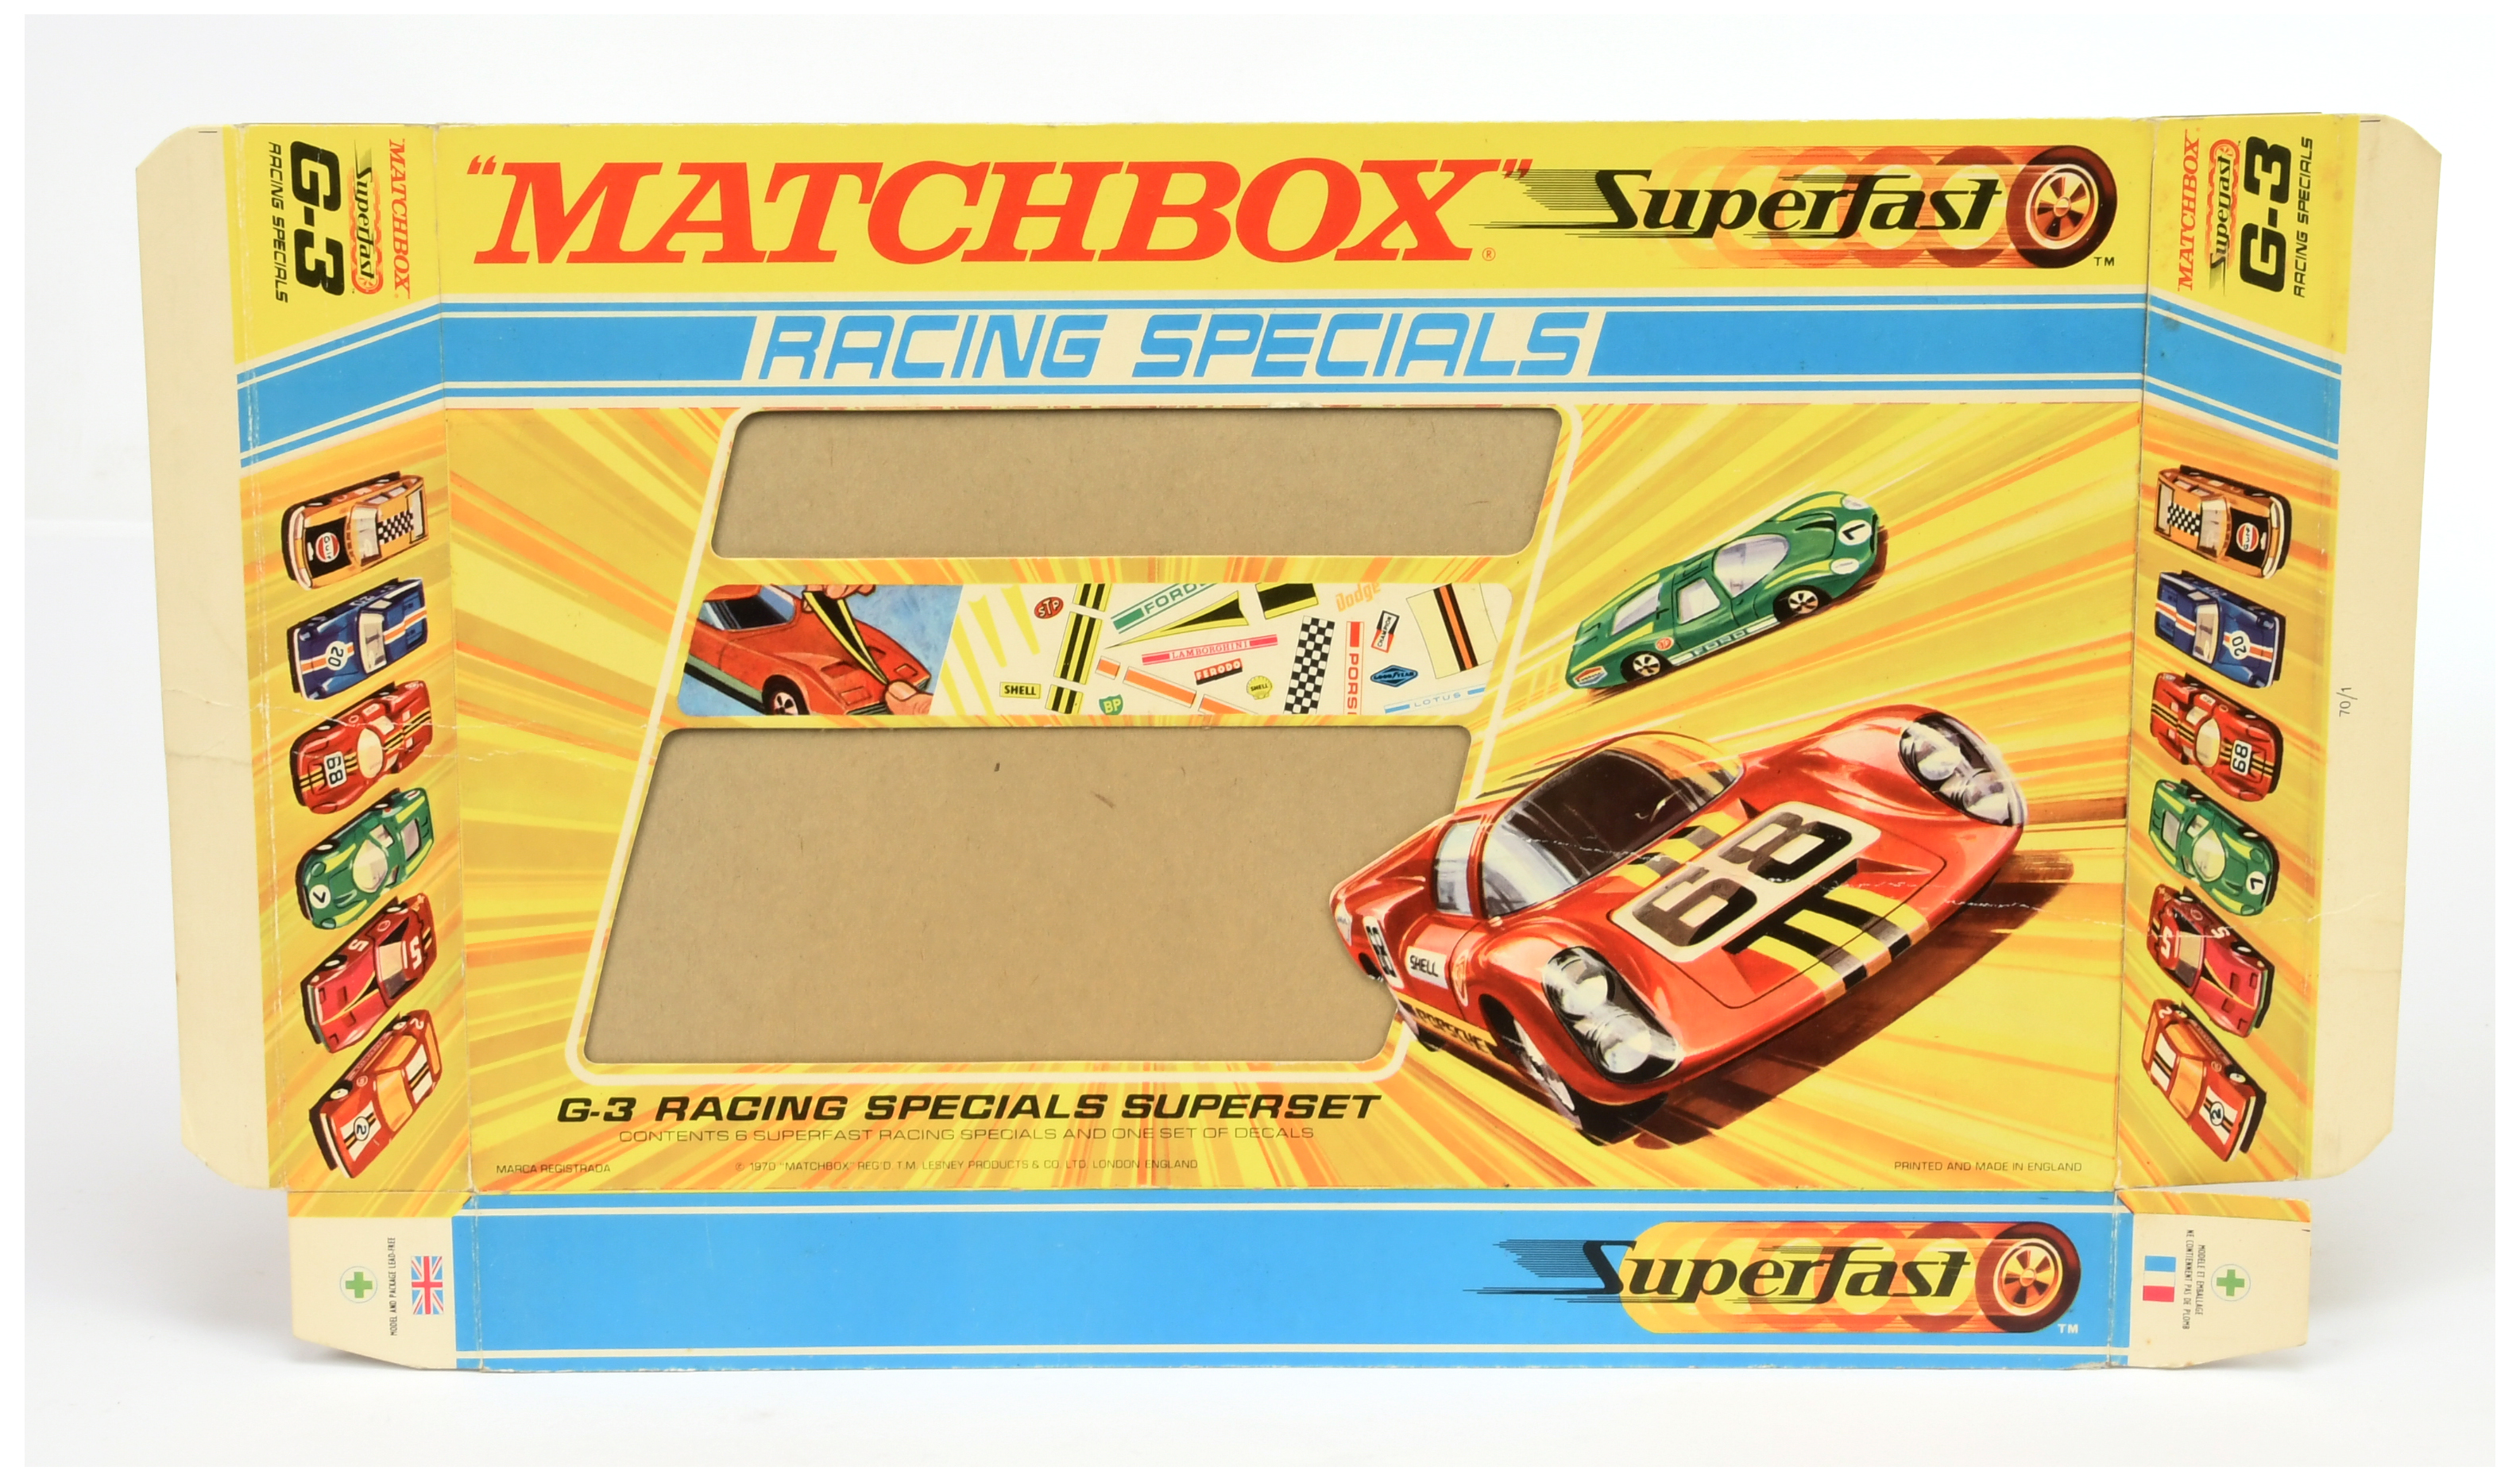 Matchbox Superfast G-3 Racing Specials Gift Set - unused outer sleeve only, possibly final Artist...